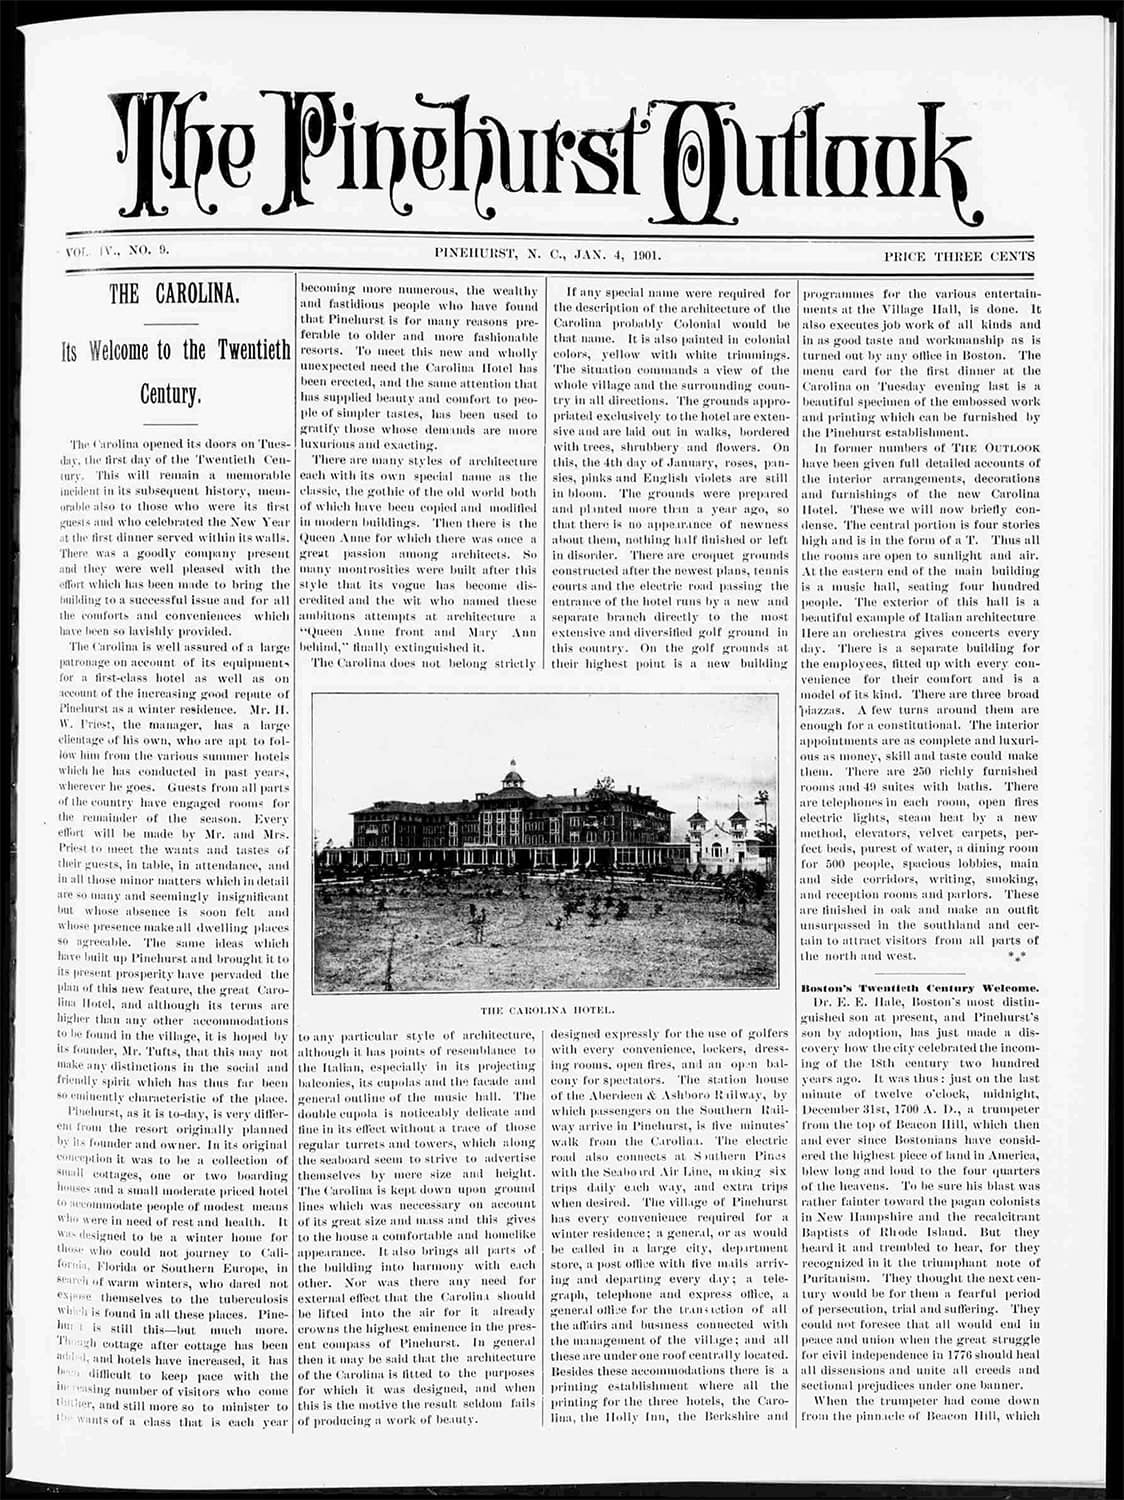 The front page of The Pinehurst Outlook reports the opening of the Carolina Hotel. The weekly paper published this story three days after the hotel opened on Jan. 1, 1901.